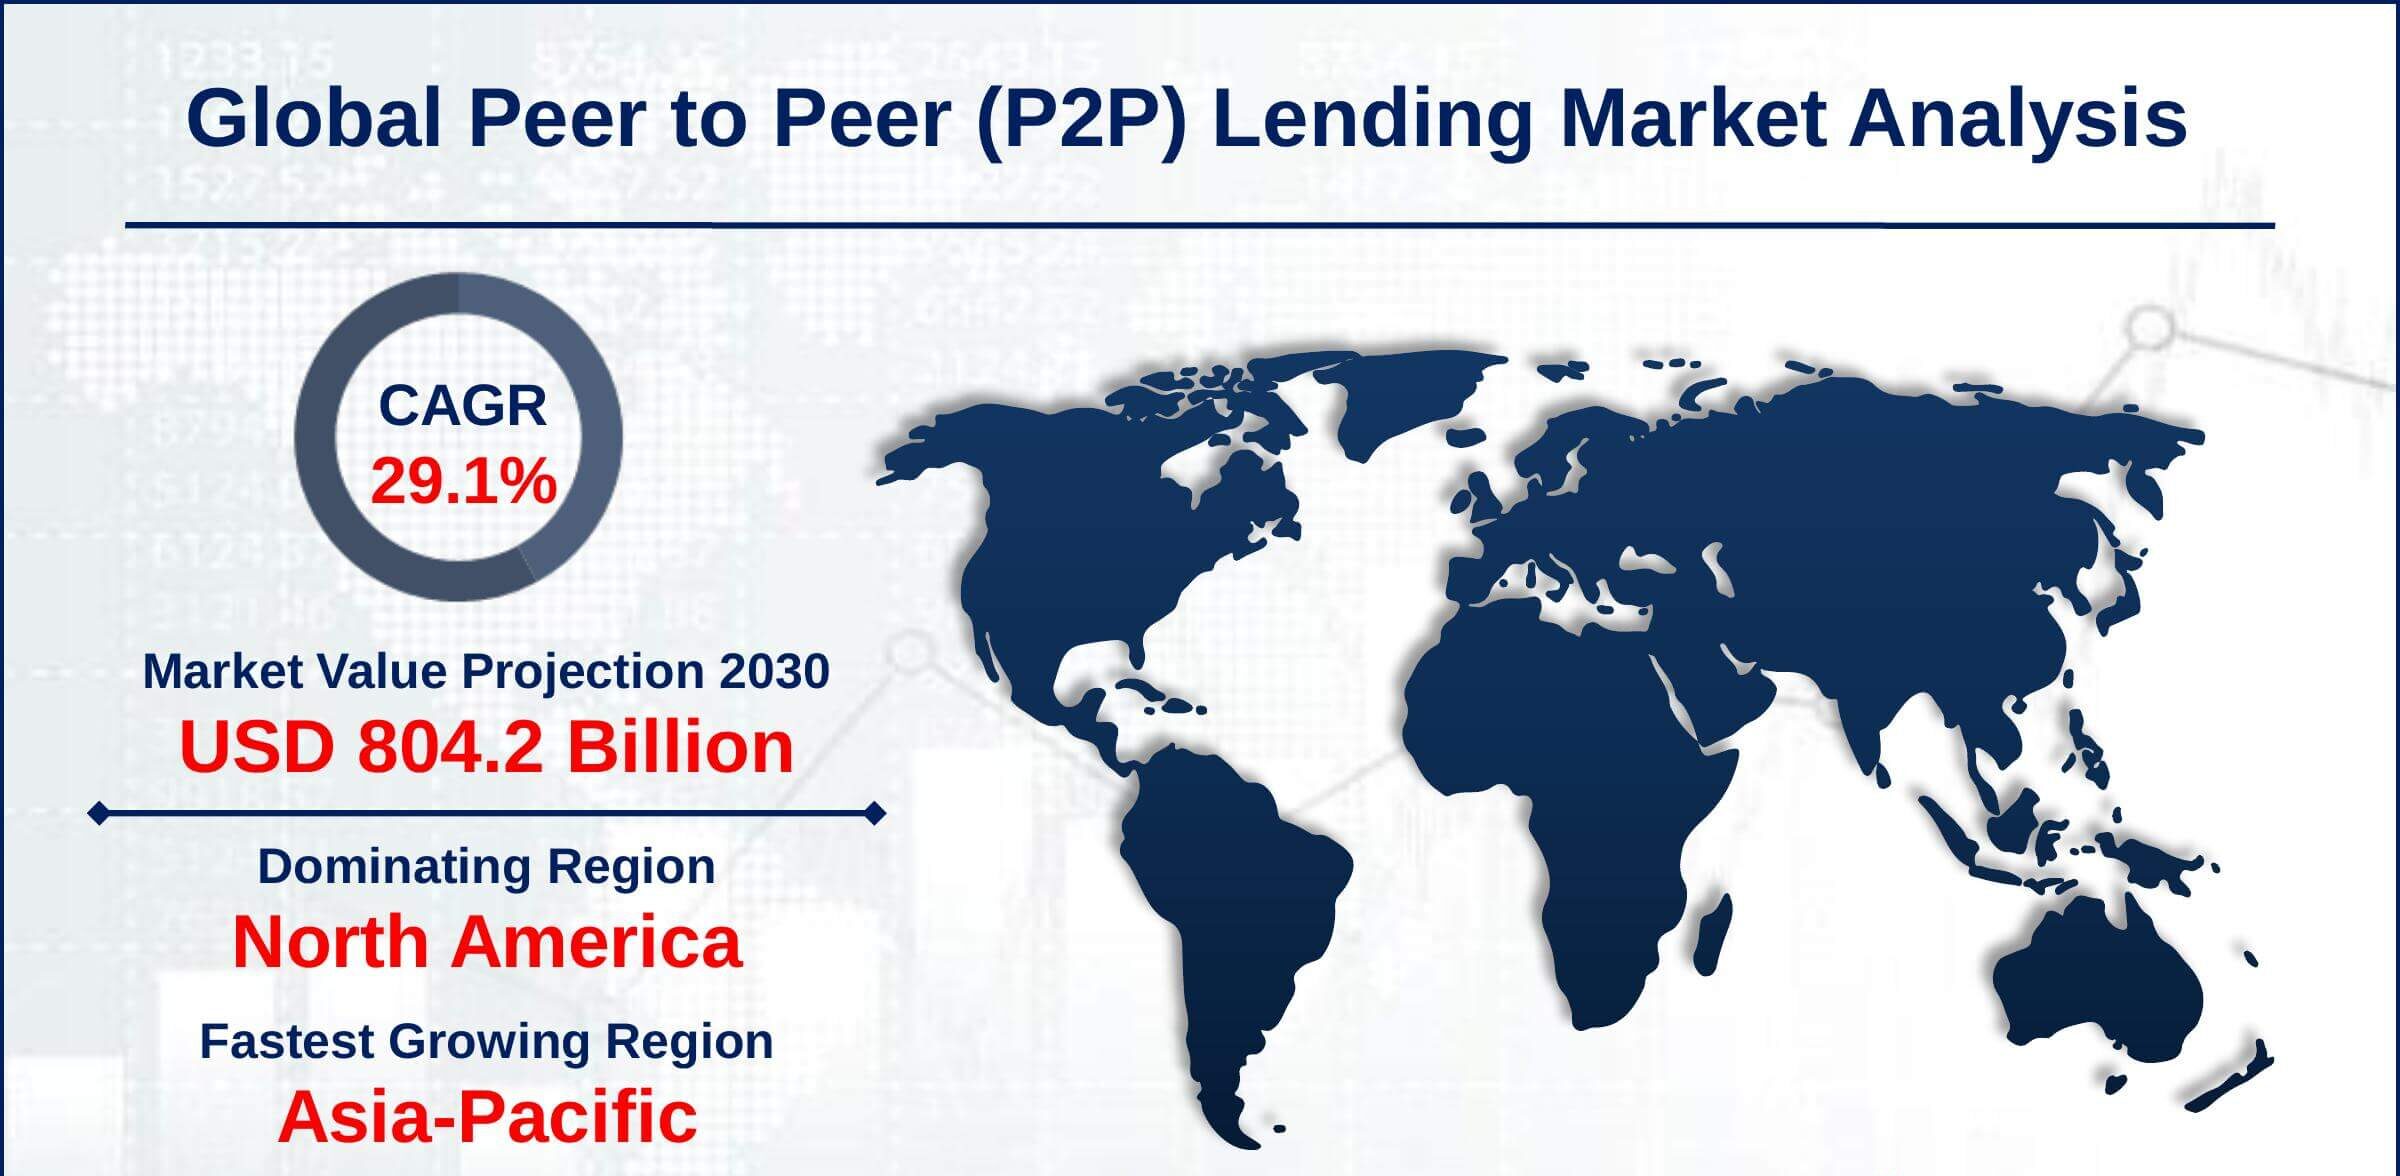 How is Peer-to-Peer (P2P) lending impacting traditional banking systems?